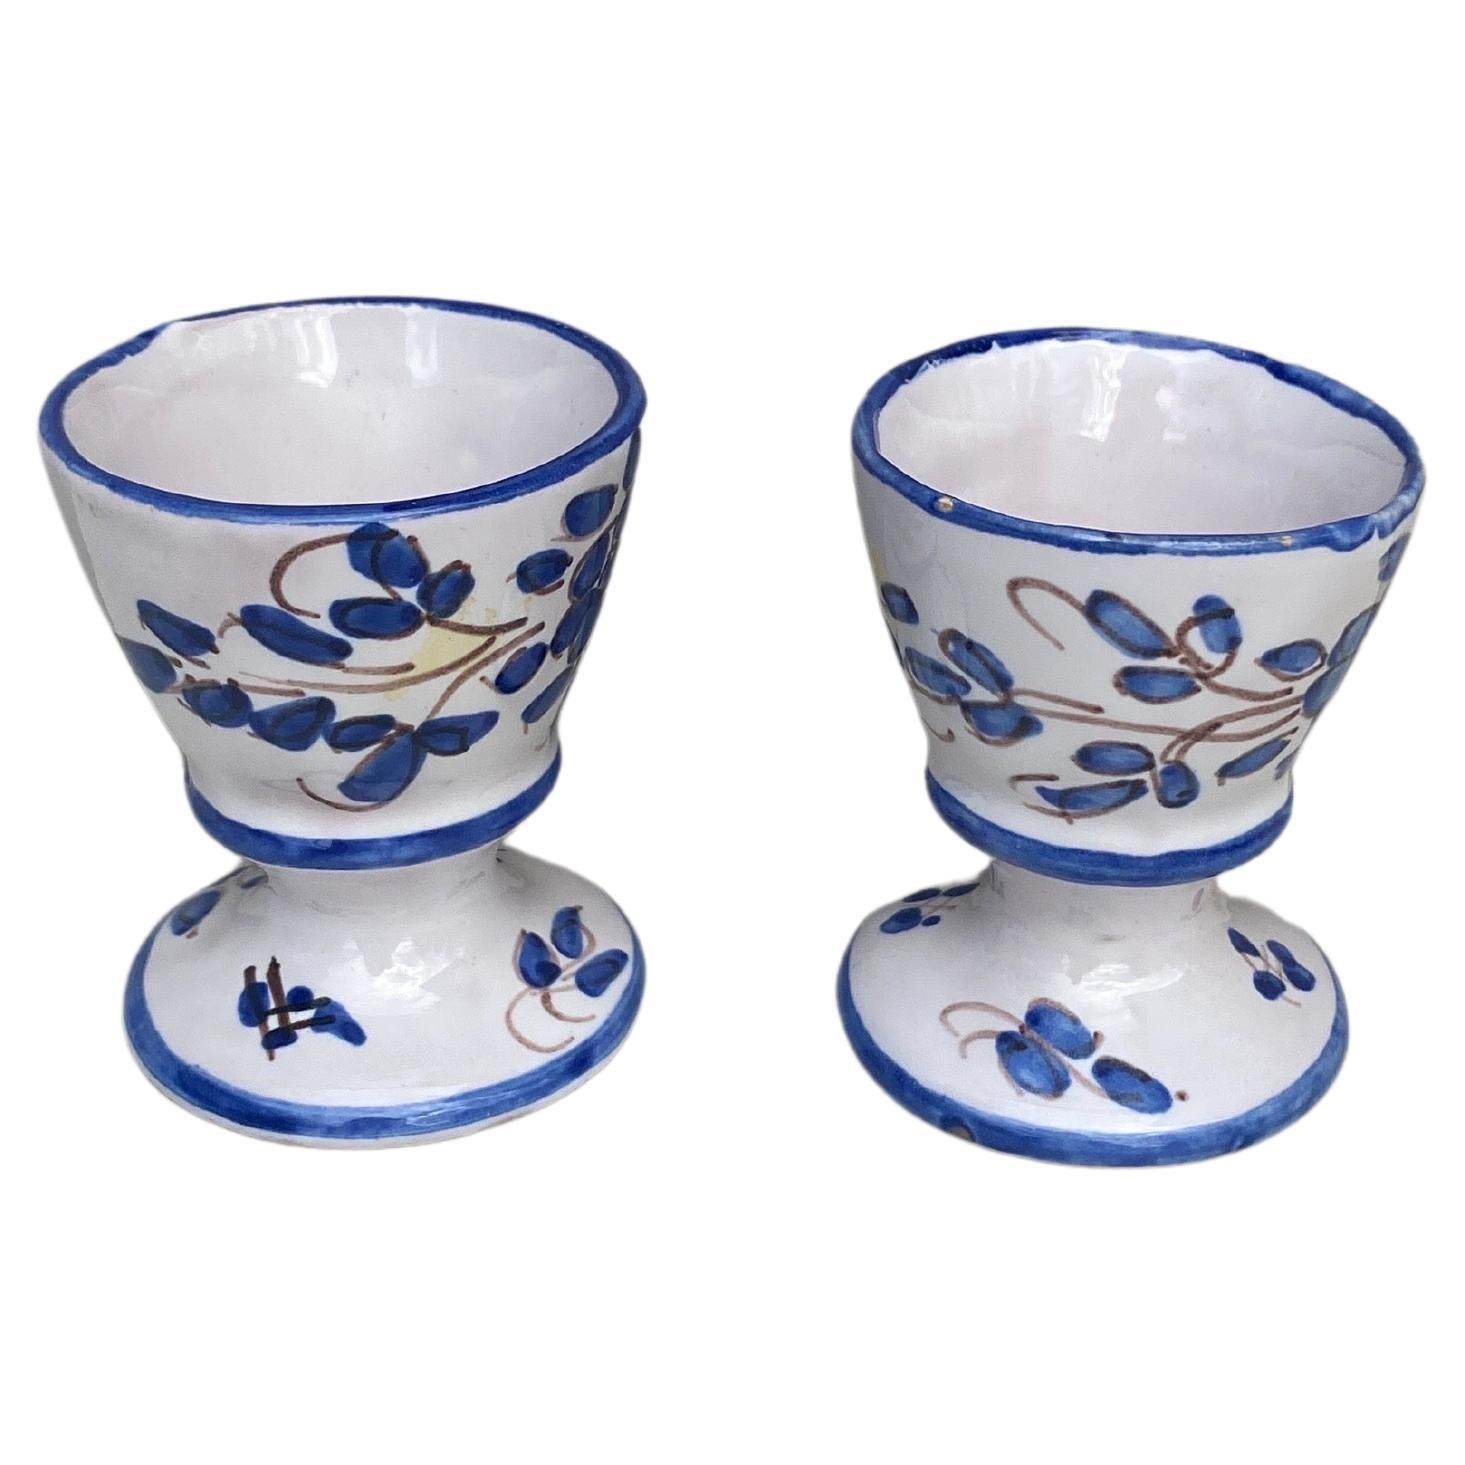 Pair of Blue & White Faience Egg Cups Martres Tolosane.
 